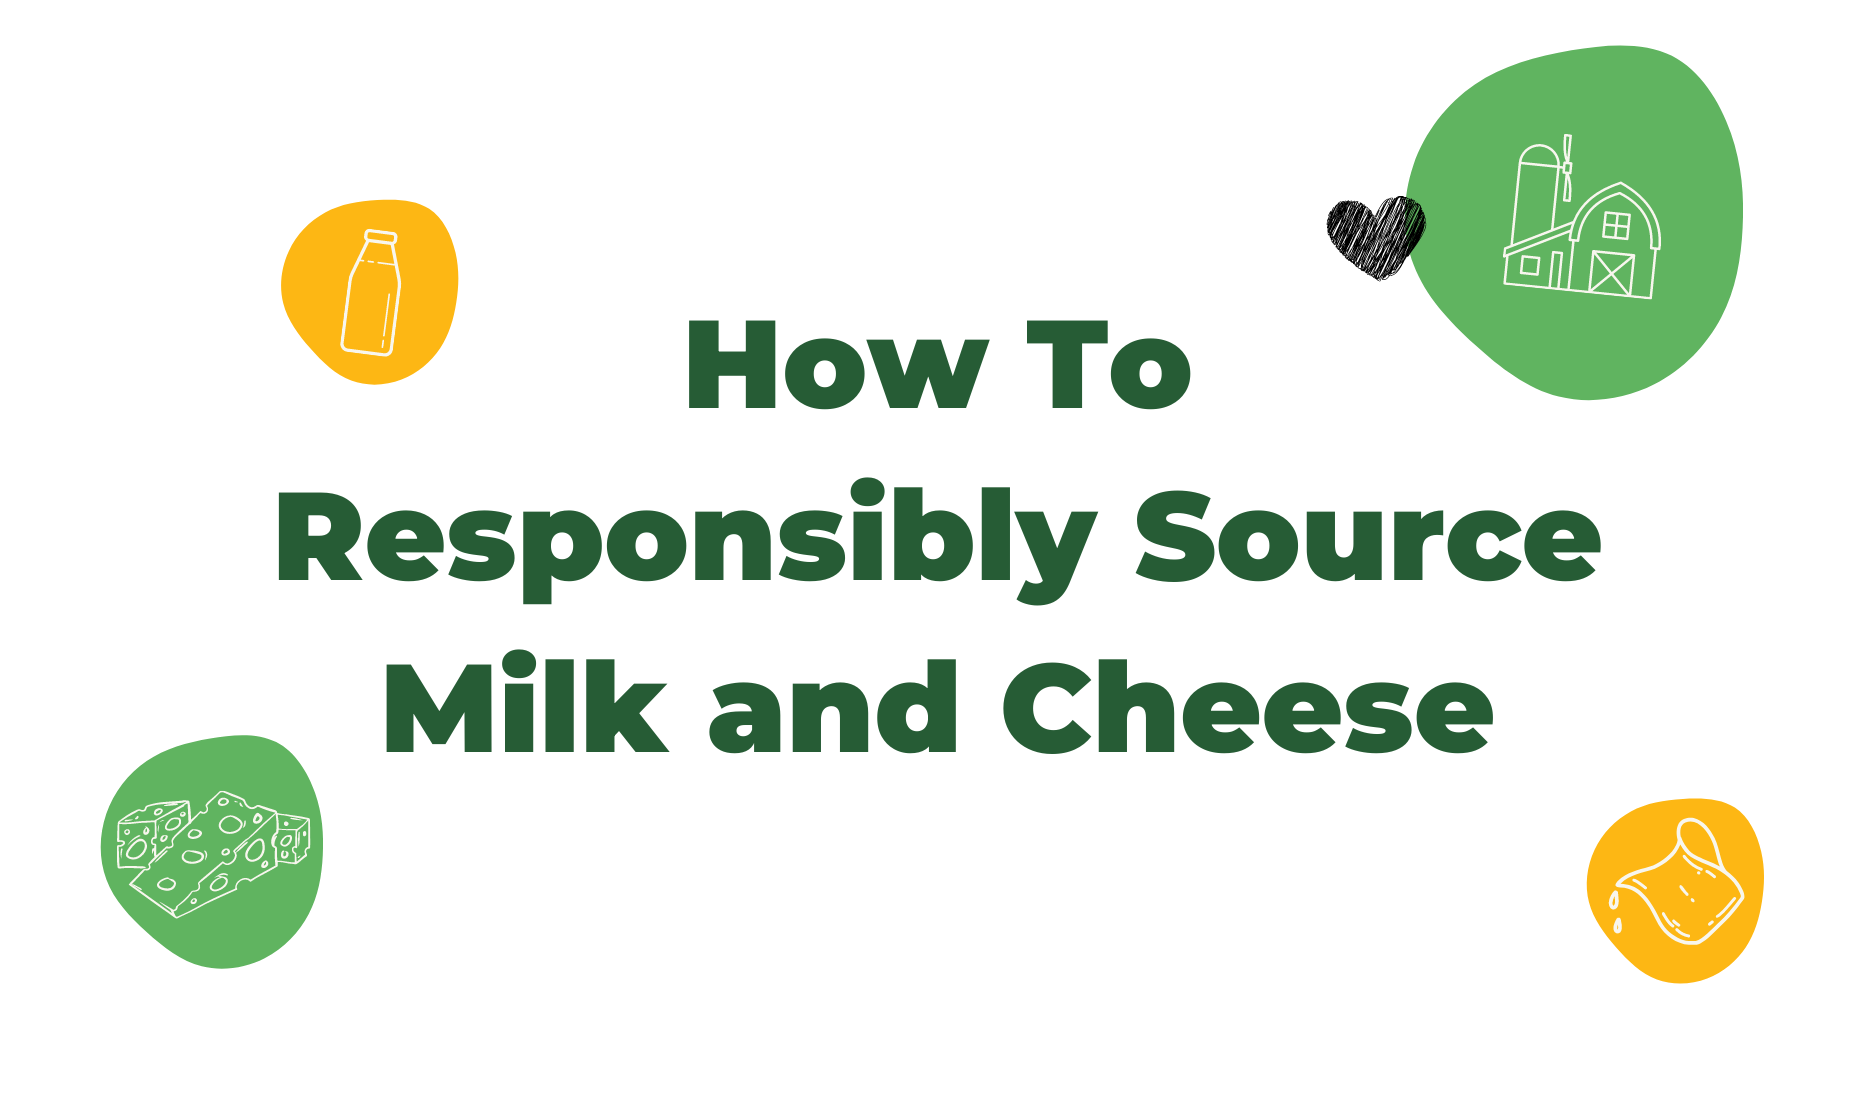 How To Responsibly Source Milk And Cheese image